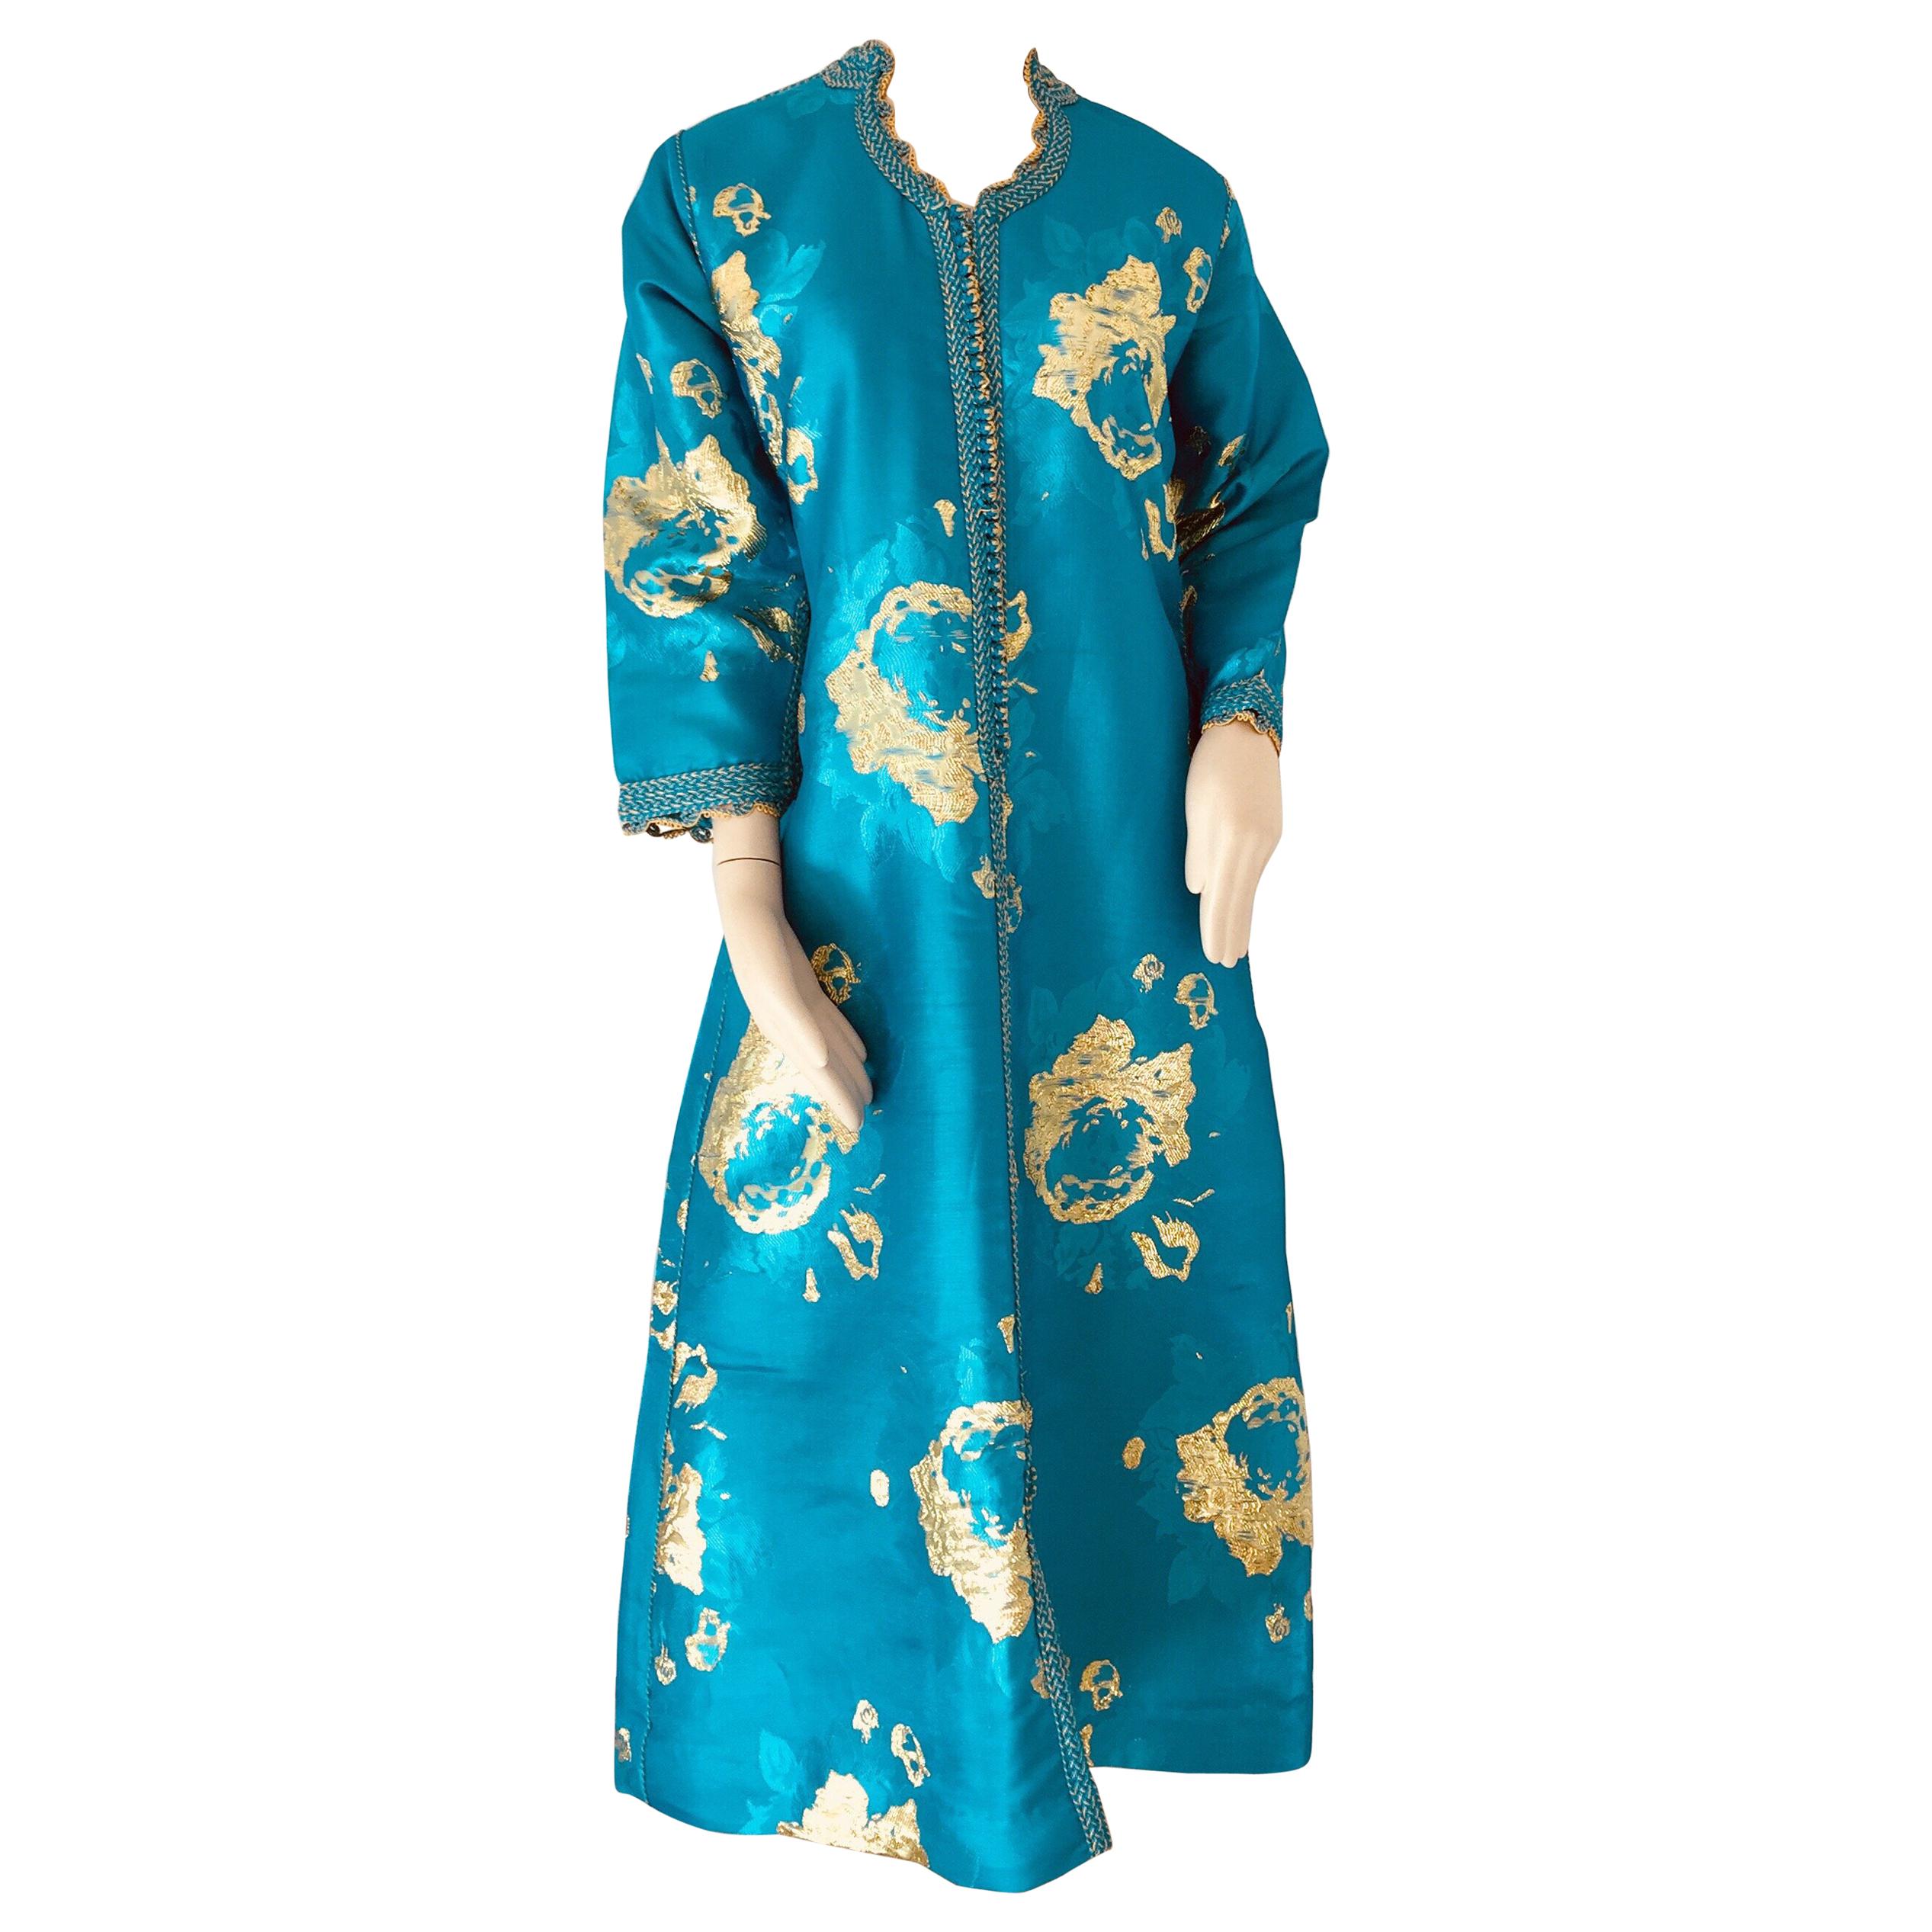 Moroccan Vintage Kaftan in Turquoise and Gold Floral Brocade Metallic Lame